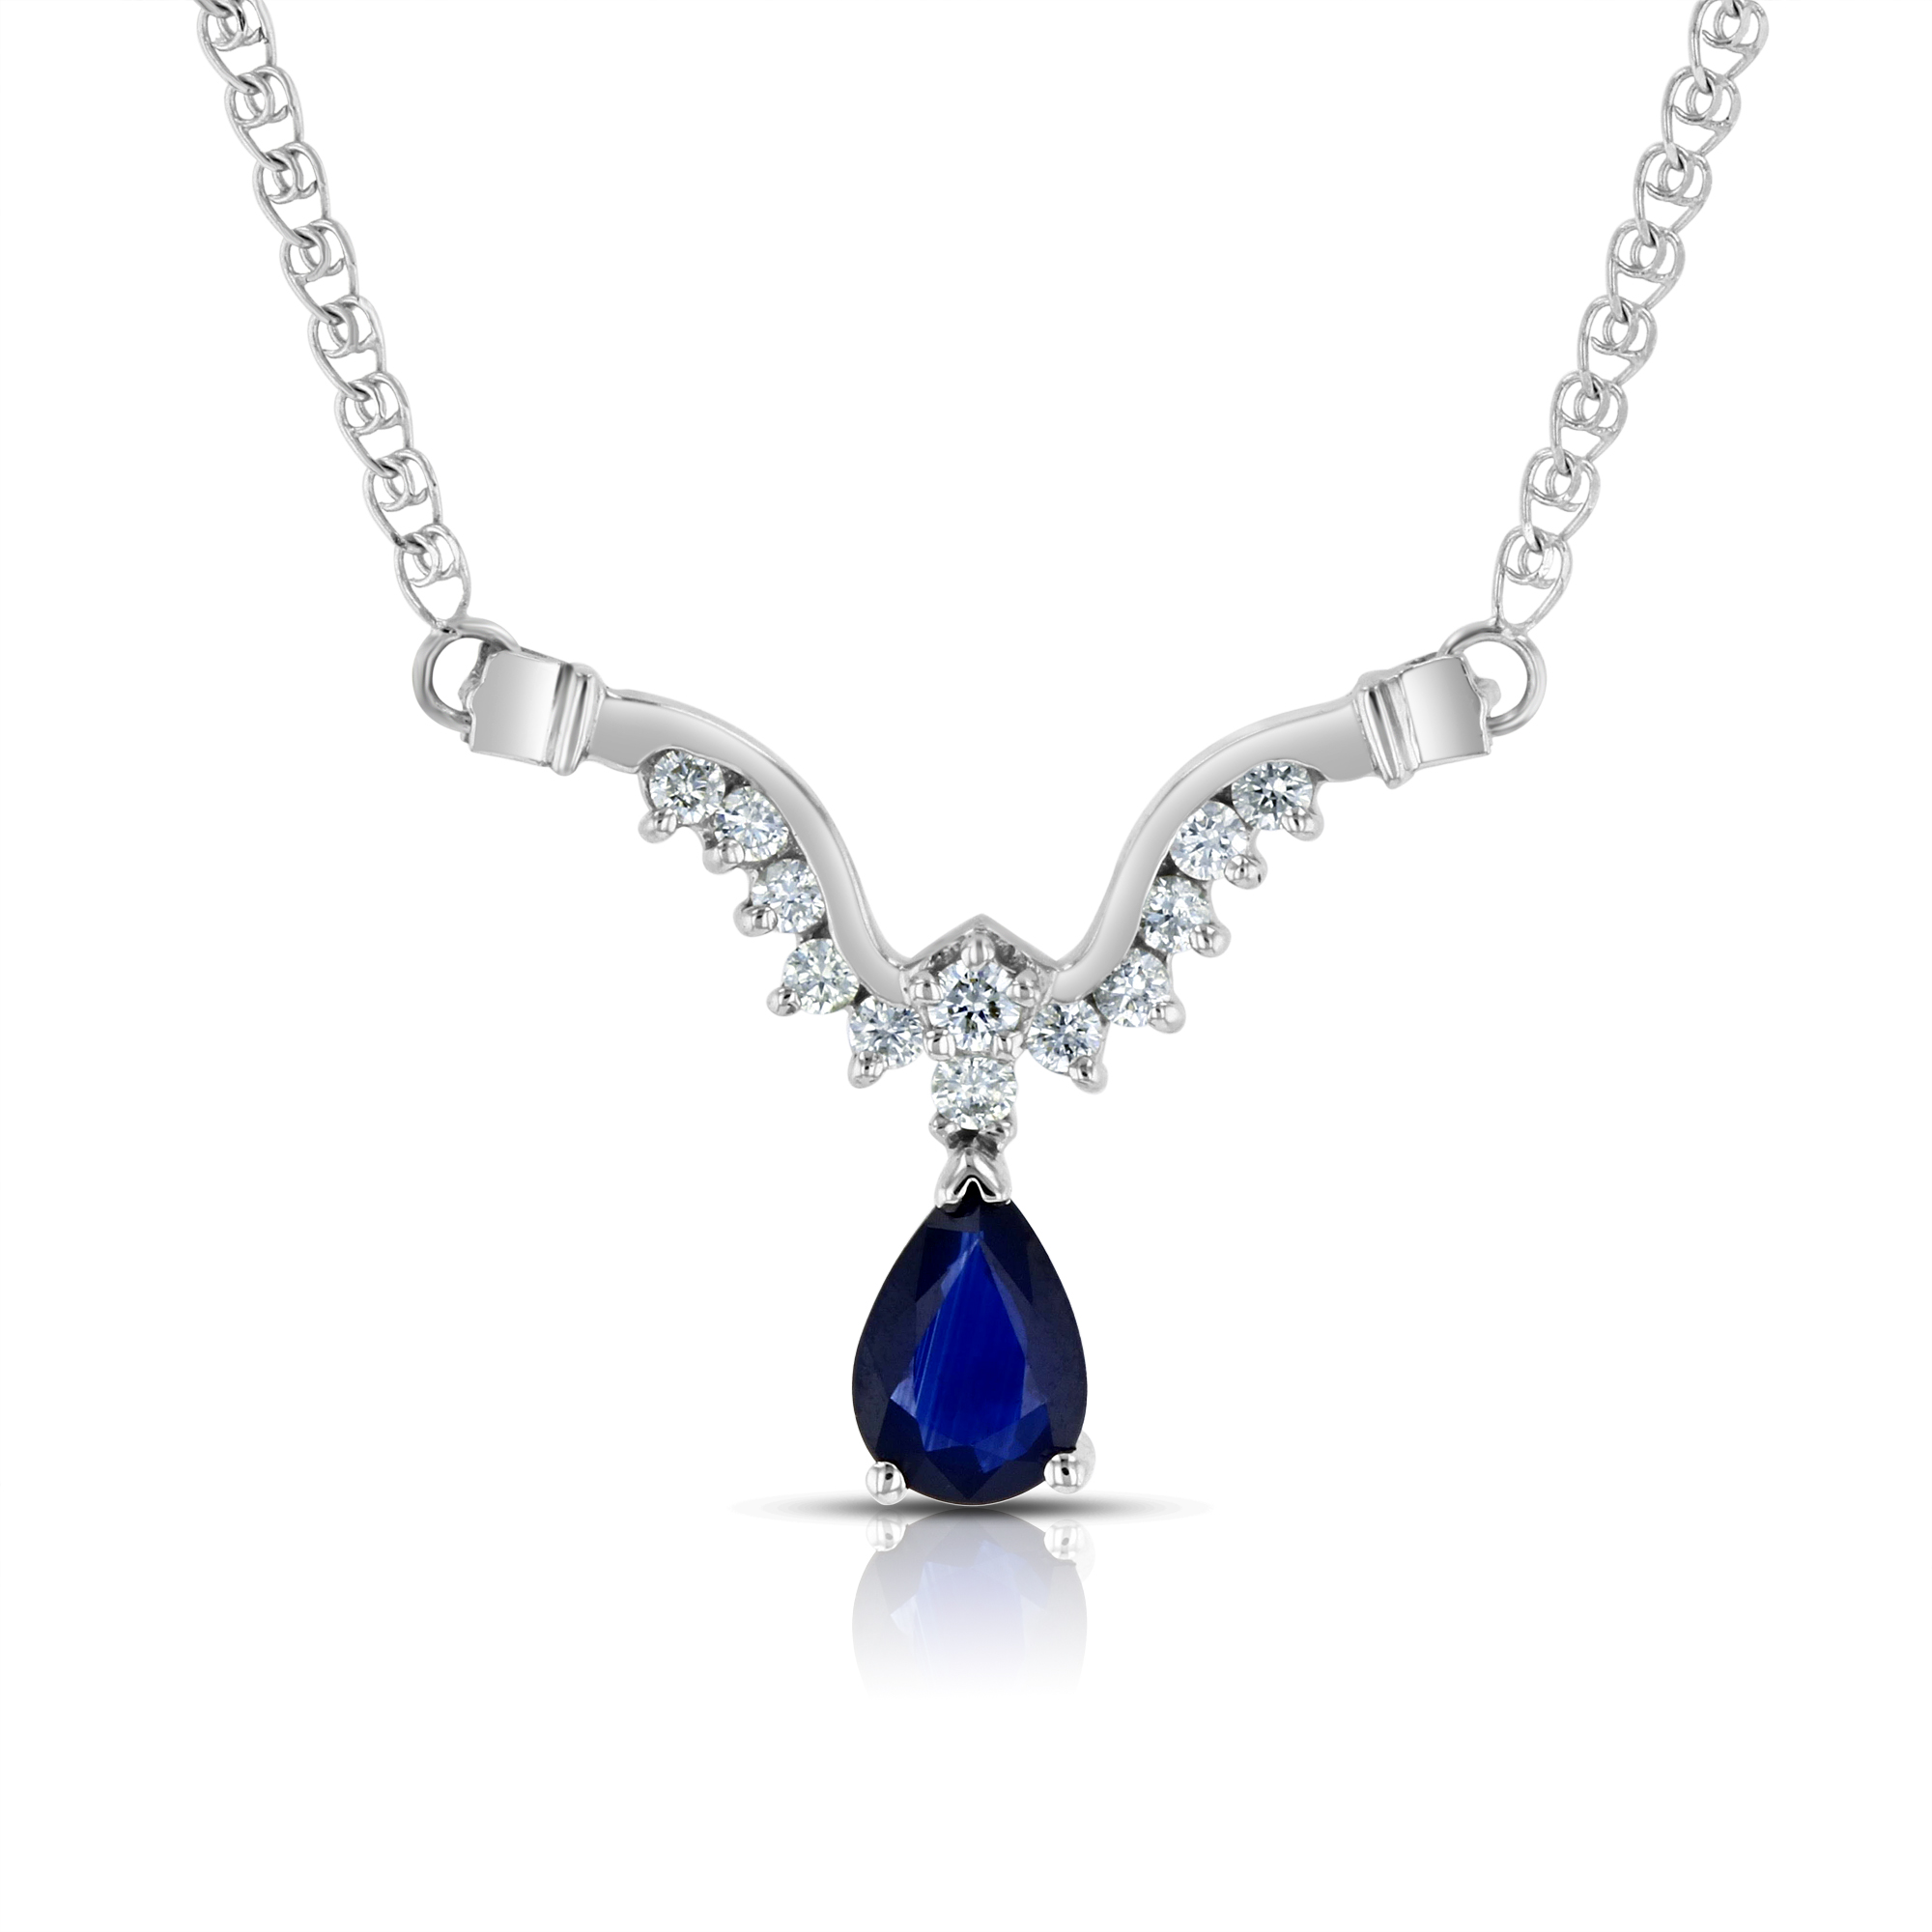 View 0.25ctw Diamond and Sapphire Pendant in 14k White Gold